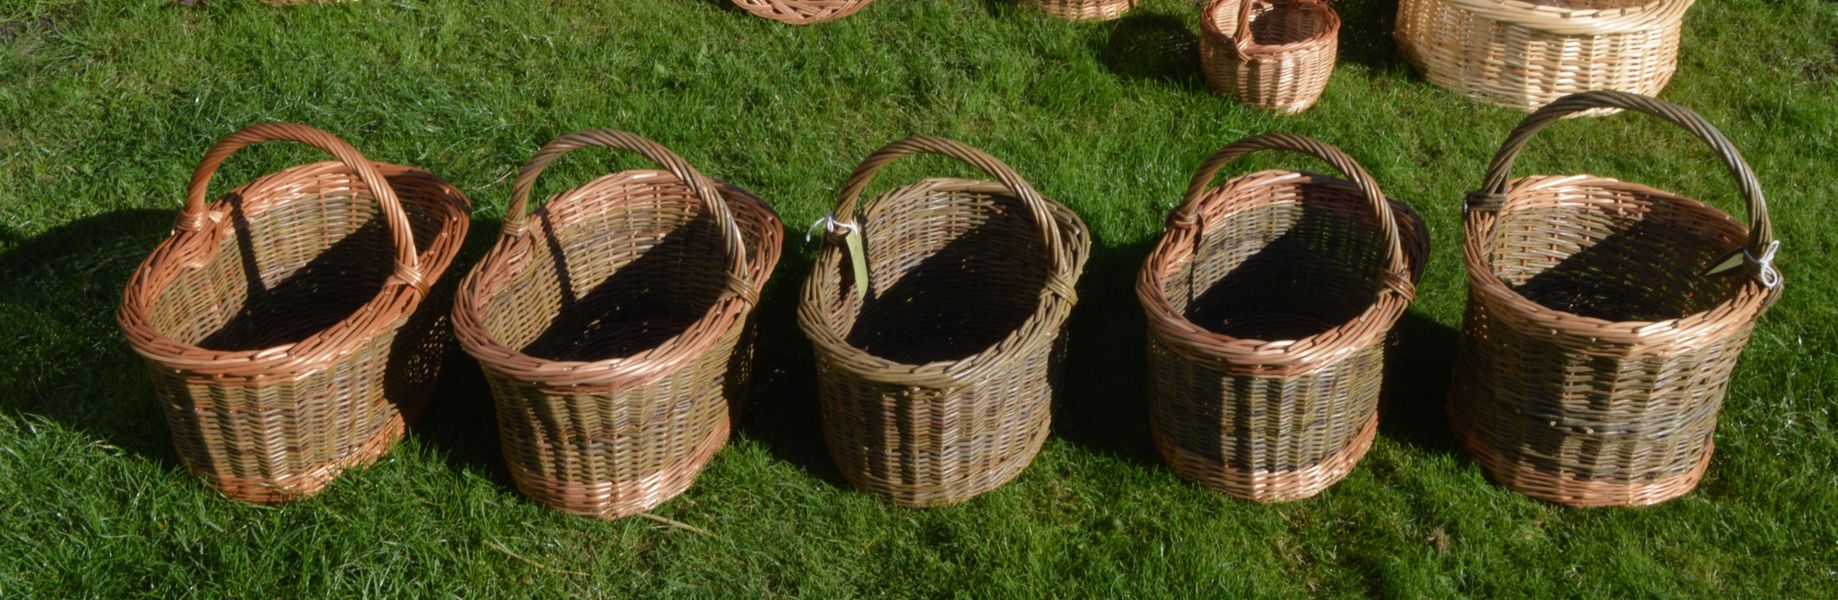 Oval baskets made by Jane Welsh